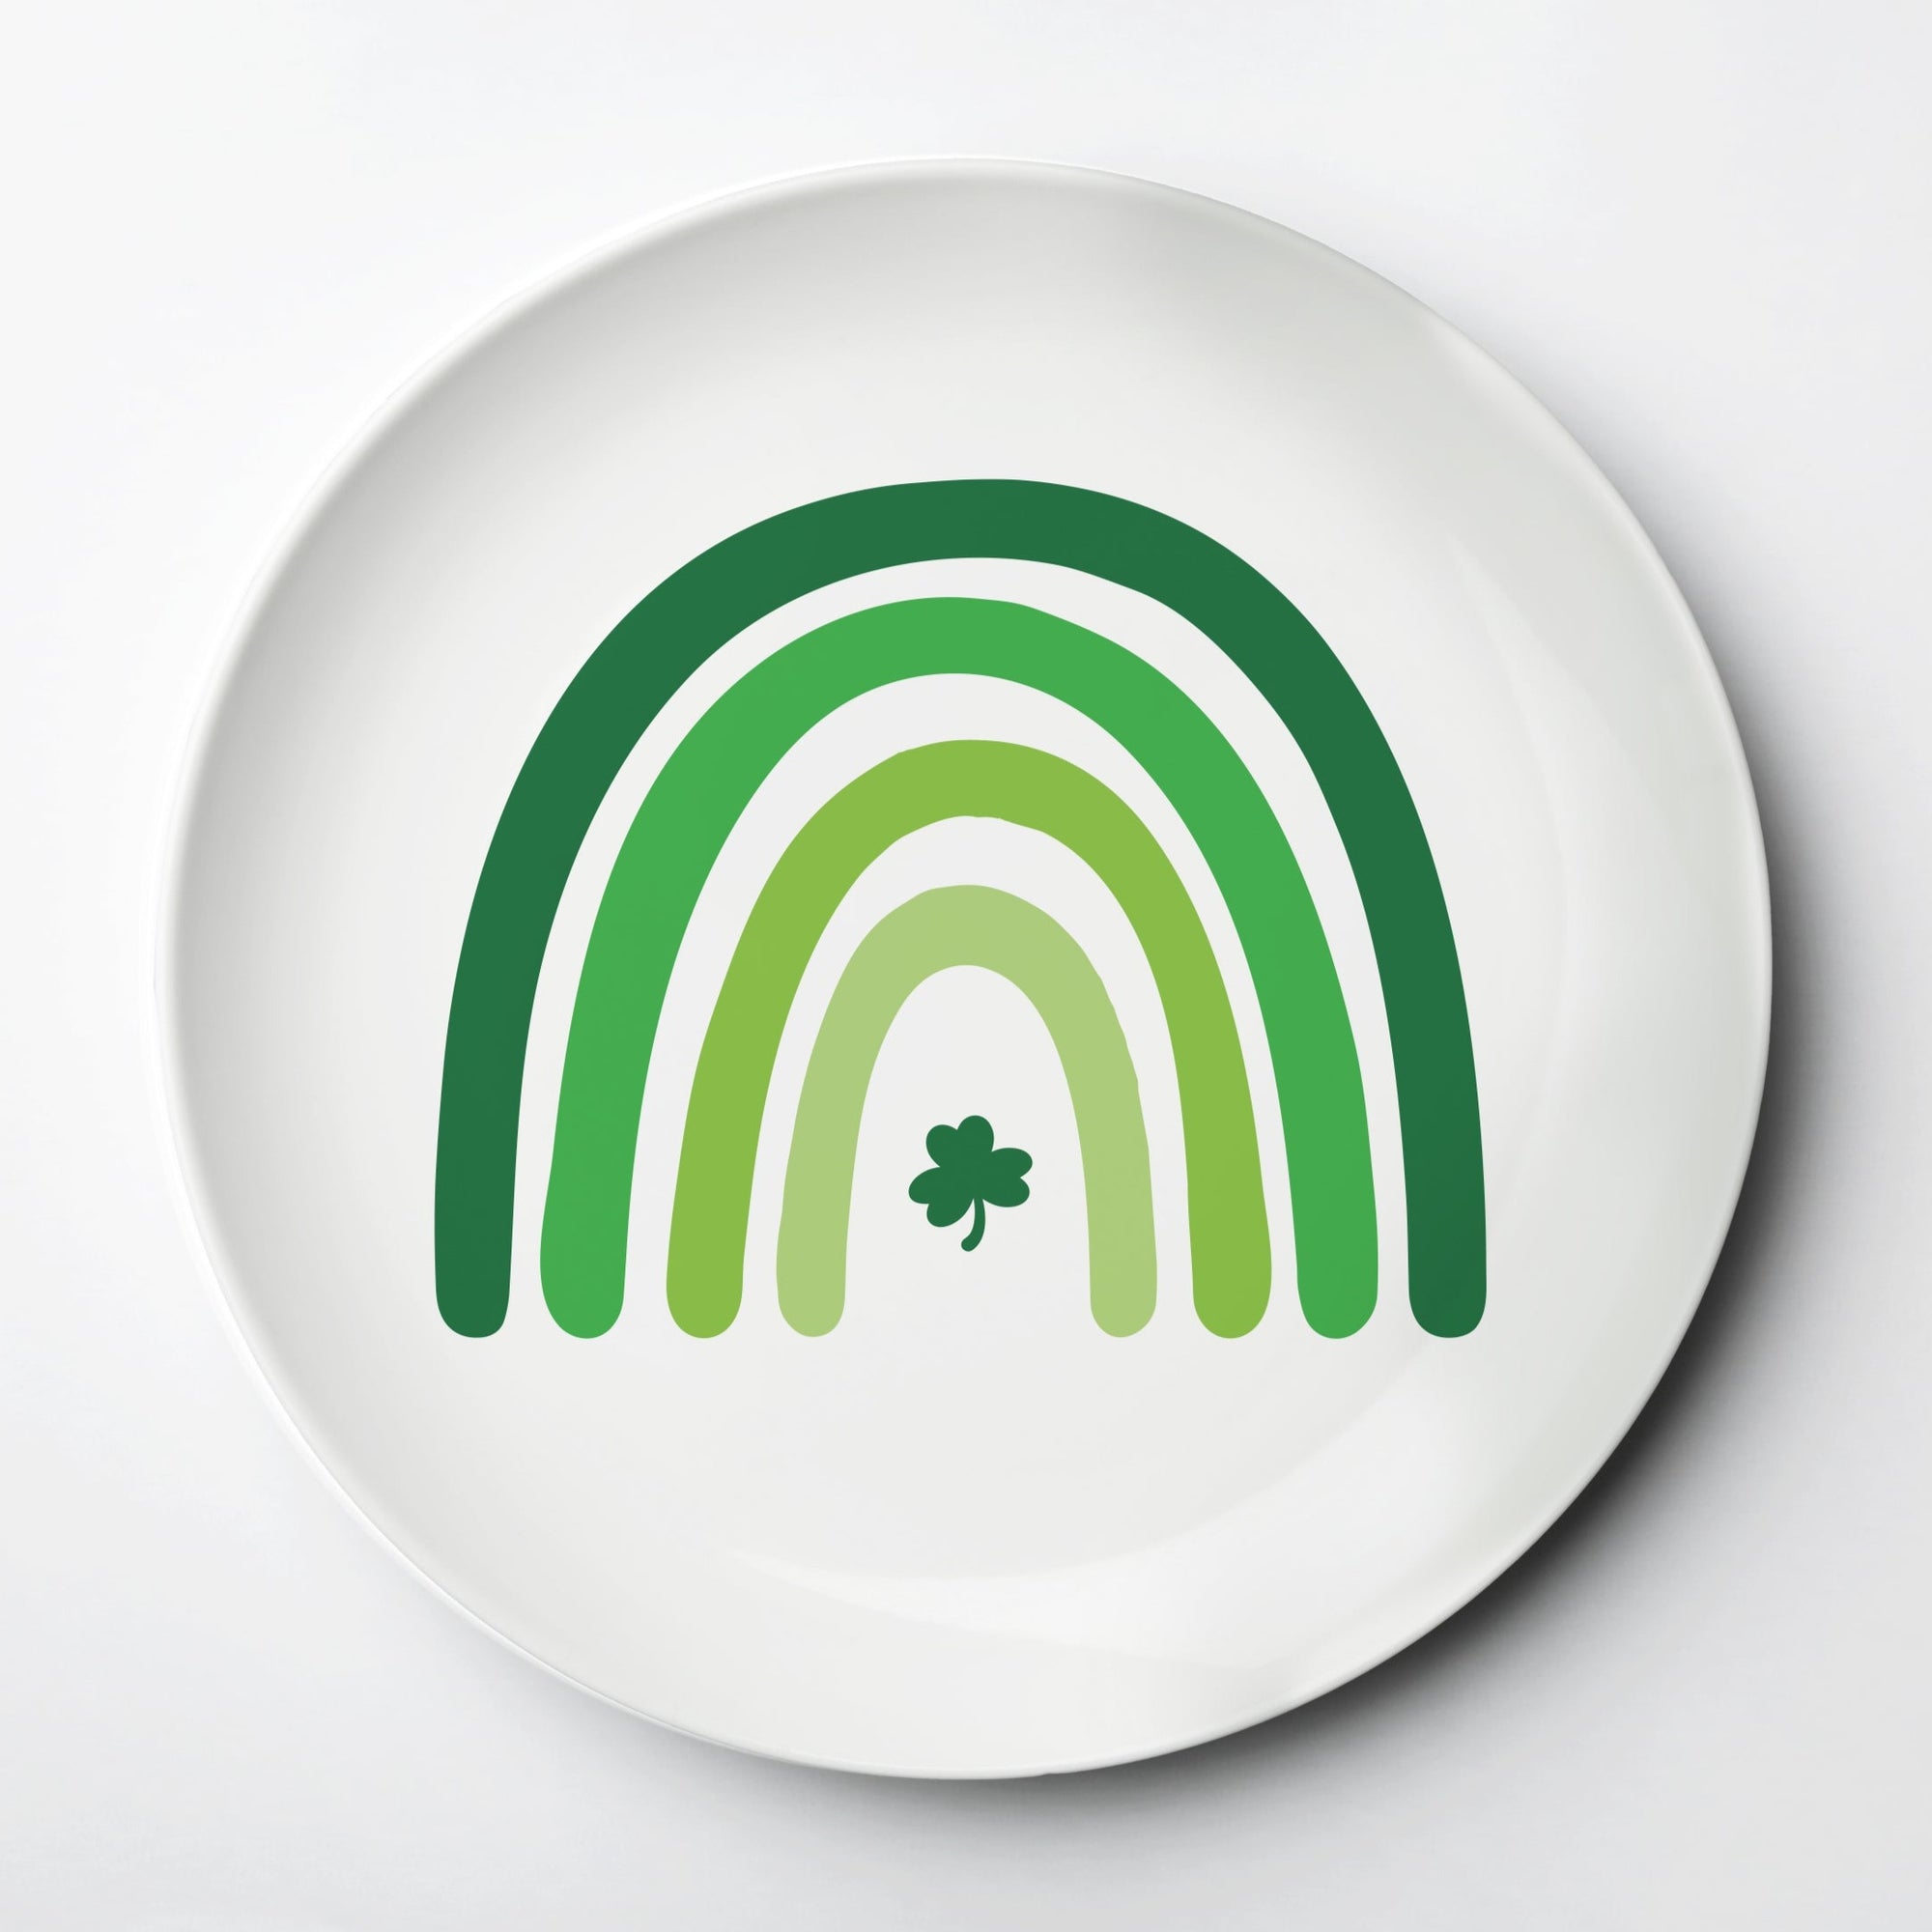 Green Rainbow ThermoSāf® kids reusable plate, microwave, dishwasher and oven safe.  Made in the USA, Pipsy.com